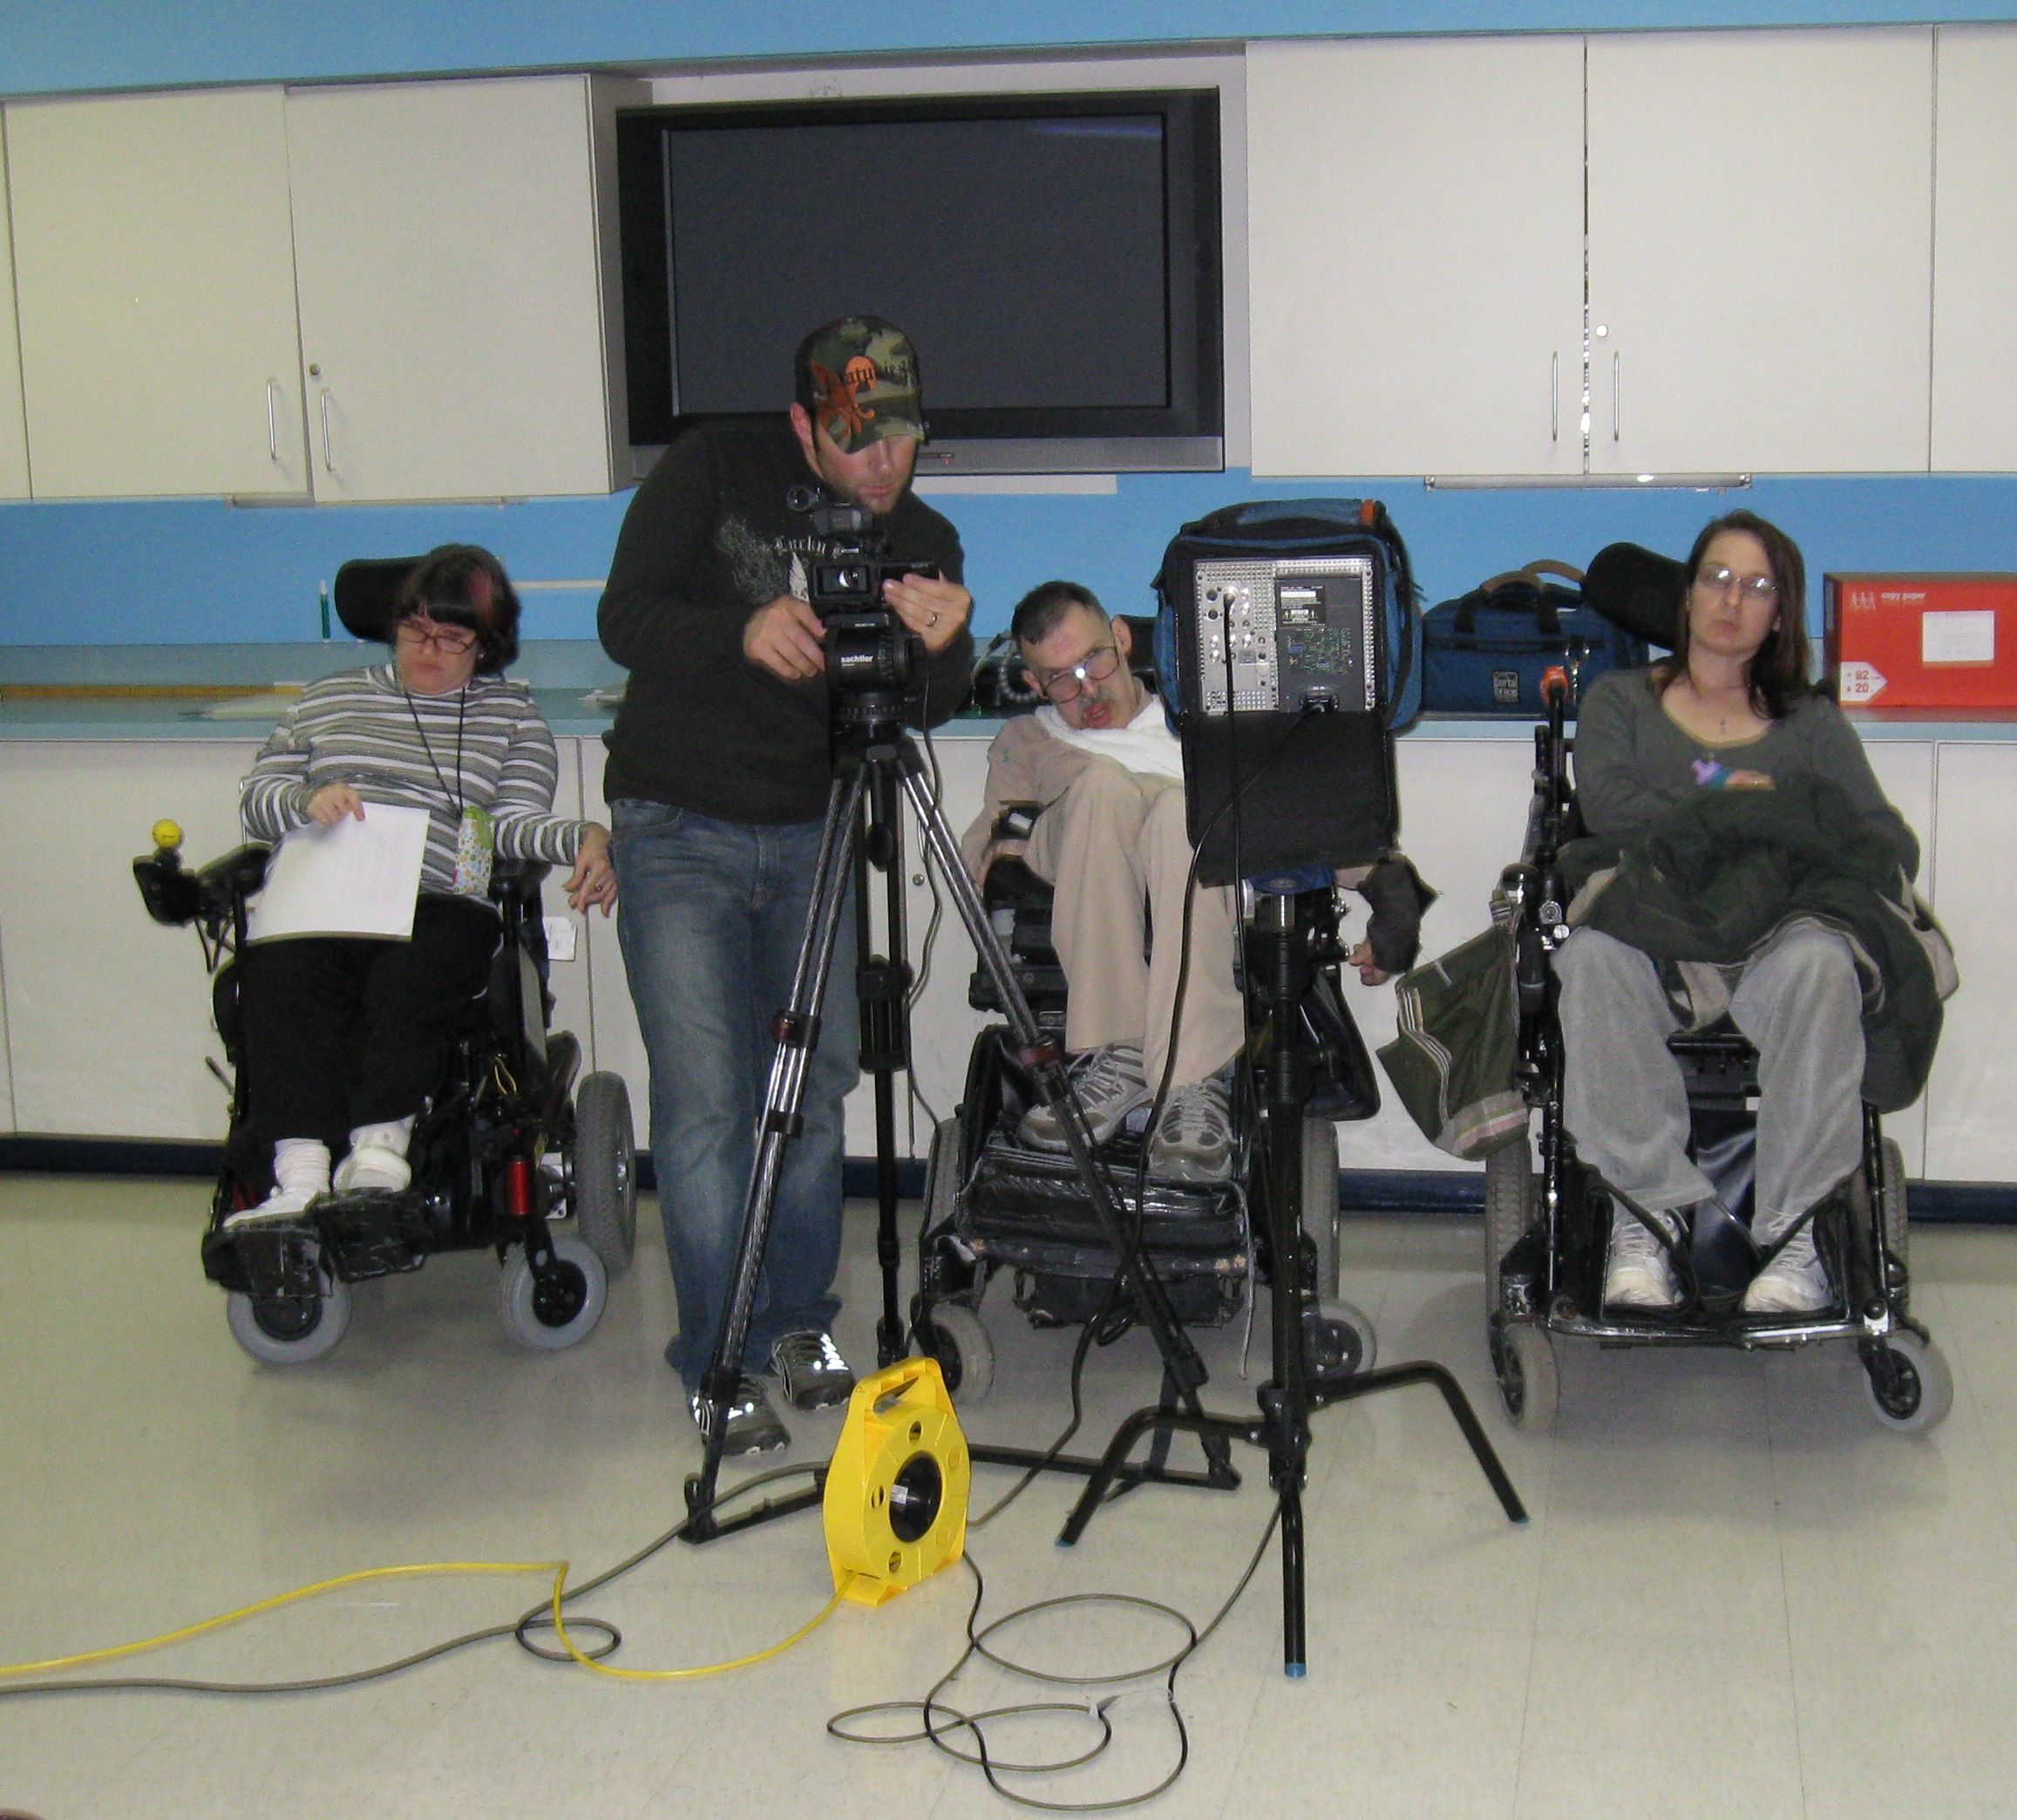 Film Director Chris Ambolino at camera flanked by three Inglis House residents in wheelchairs.